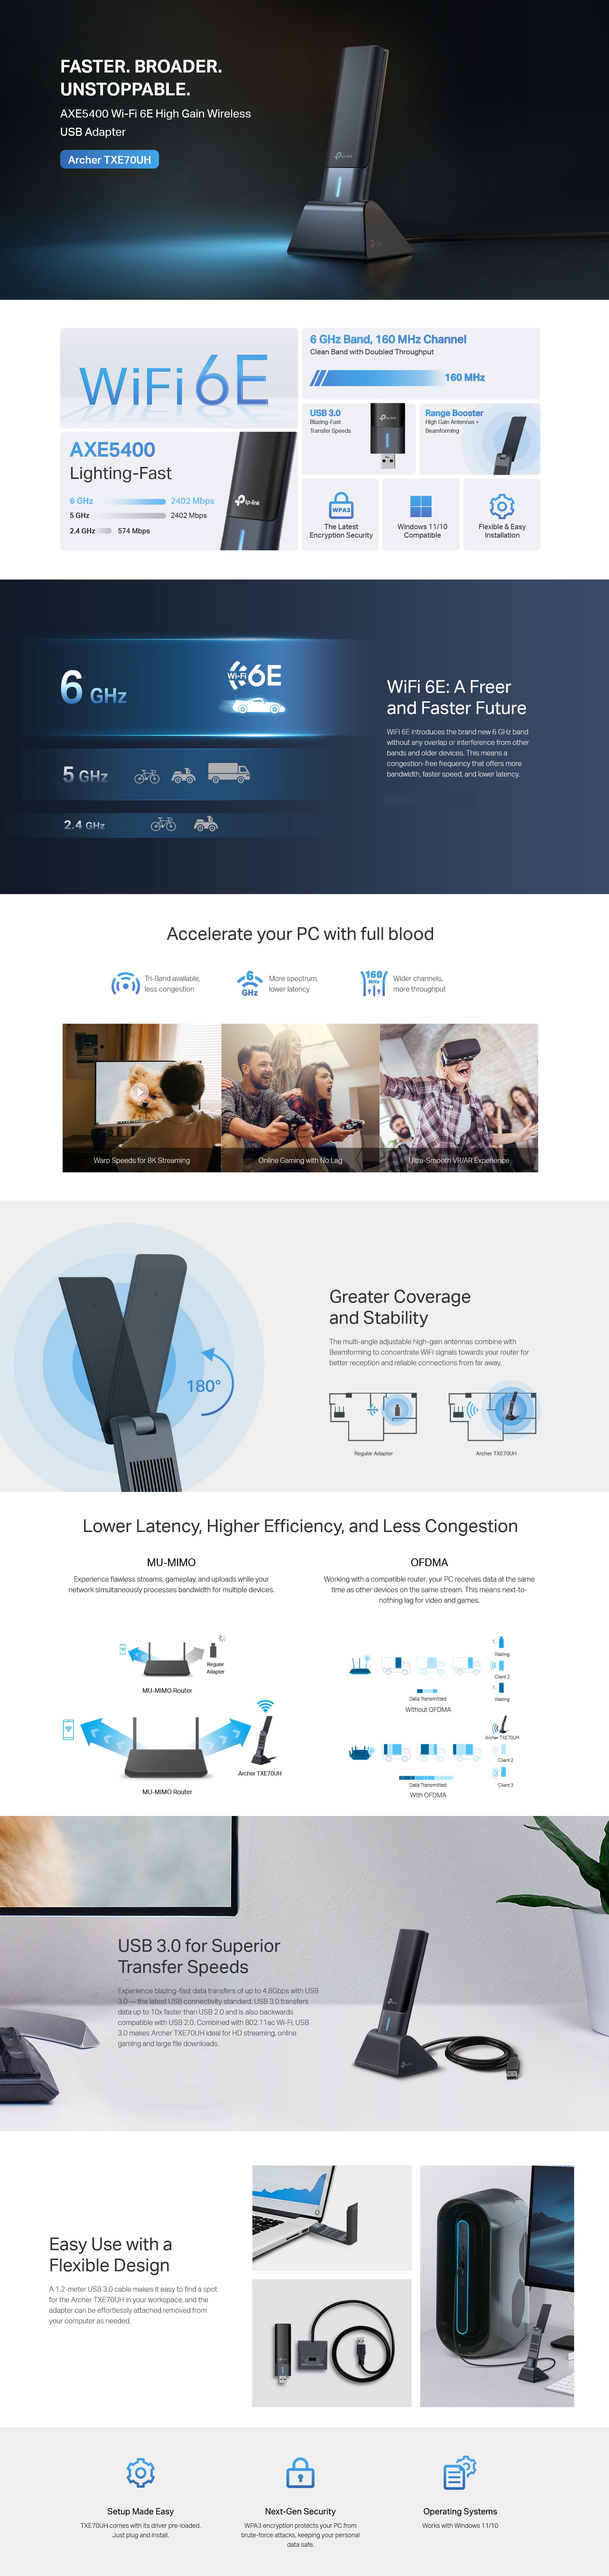 A large marketing image providing additional information about the product TP-Link Archer TXE70UH - AXE5400 High Gain Tri-Band Wi-Fi 6E USB Adapter - Additional alt info not provided